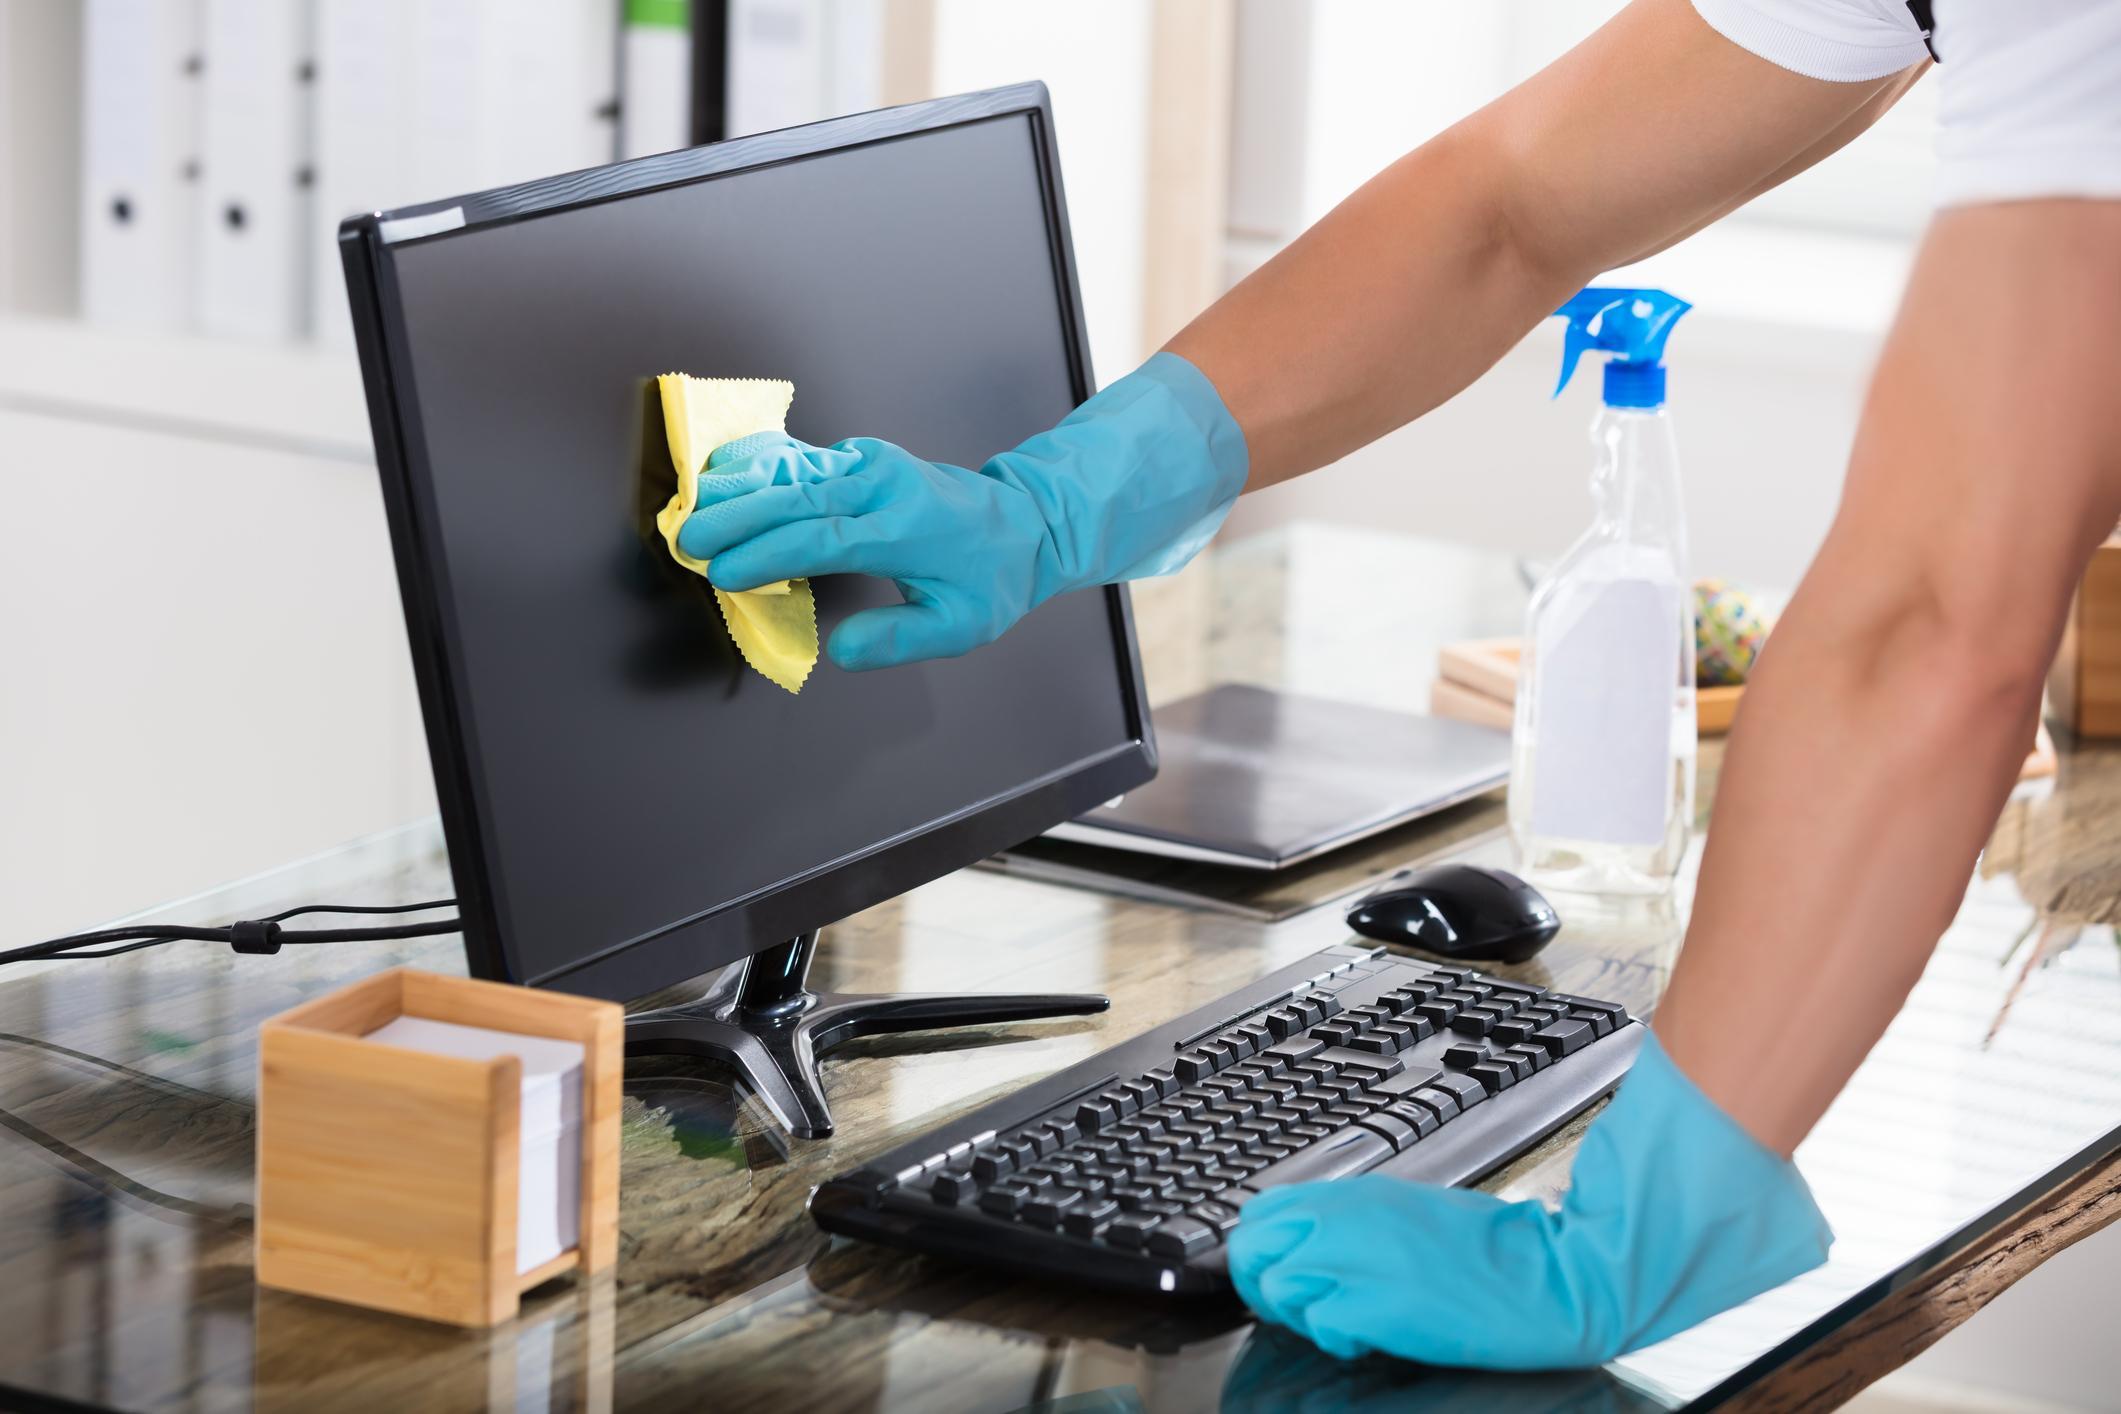 How To Clean A Monitor – 3 Steps To A Streak-Free Screen